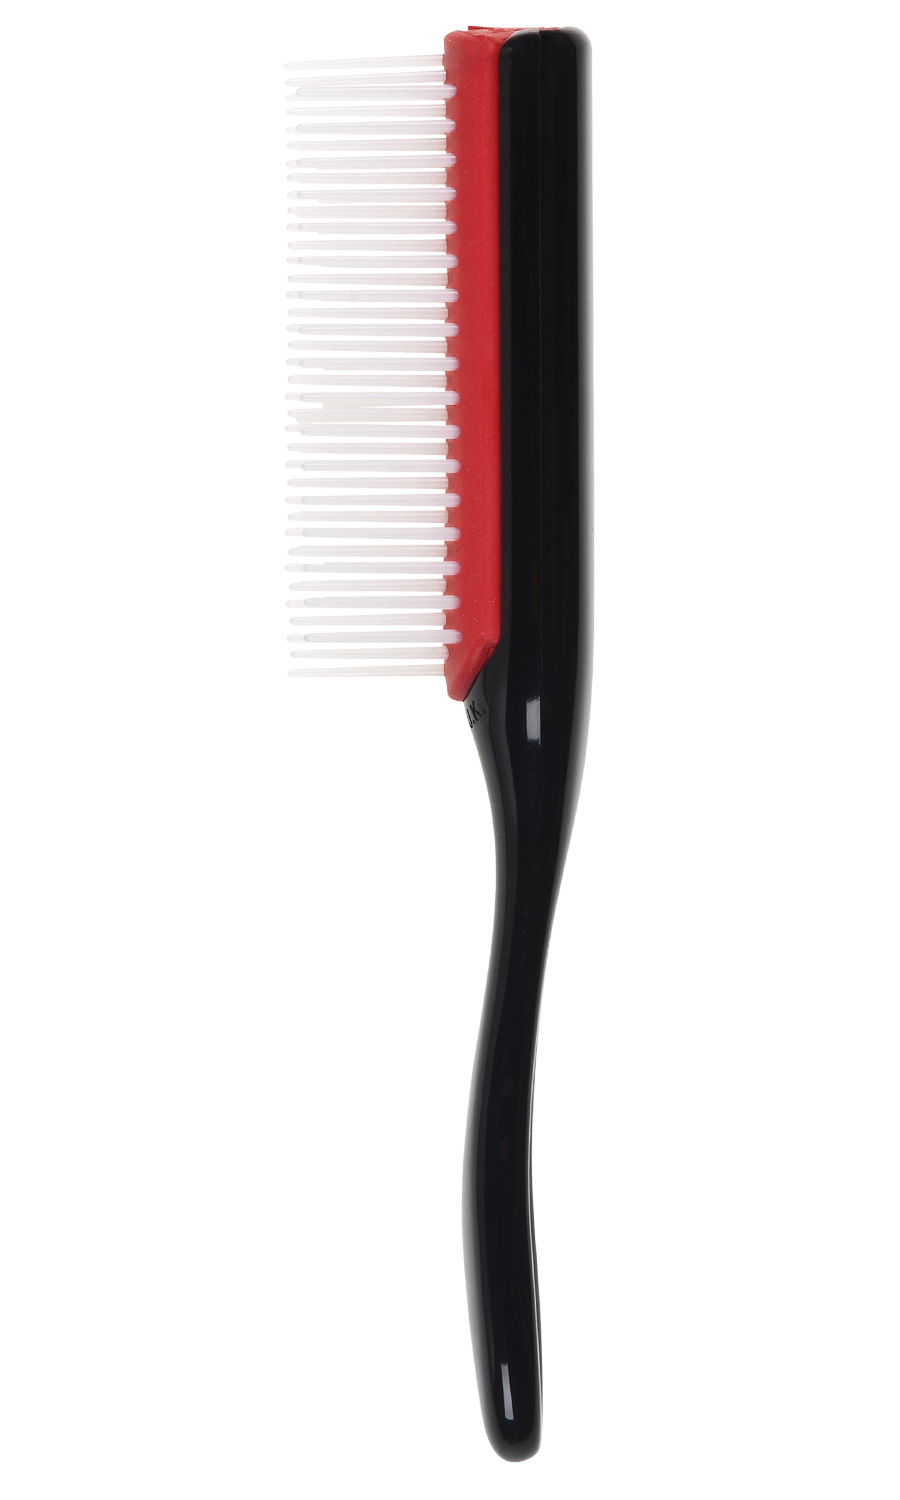 Denman Hair Brush for Curly Hair D3 (Black) 7 Row Classic Styling Brush for Detangling, Separating, Shaping and Defining Curls